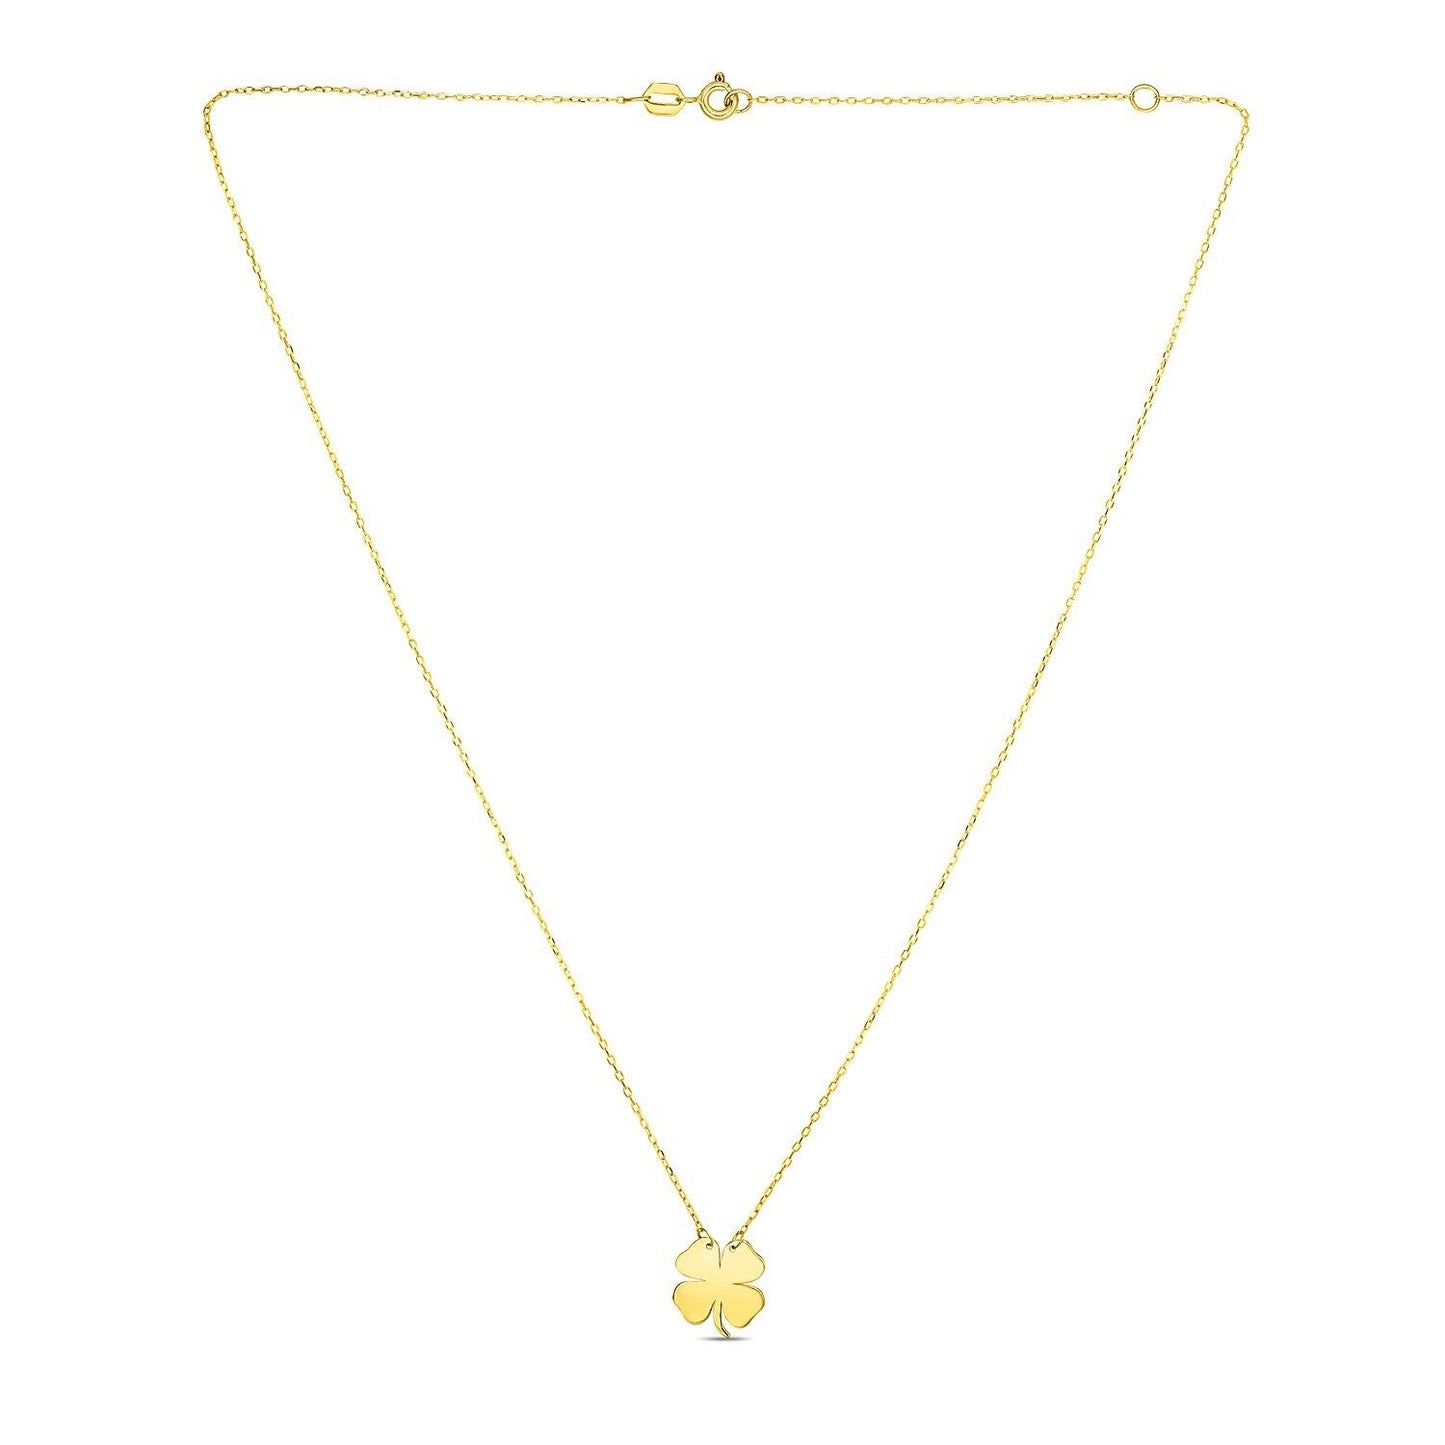 14K Yellow Gold Four Leaf Clover Necklace